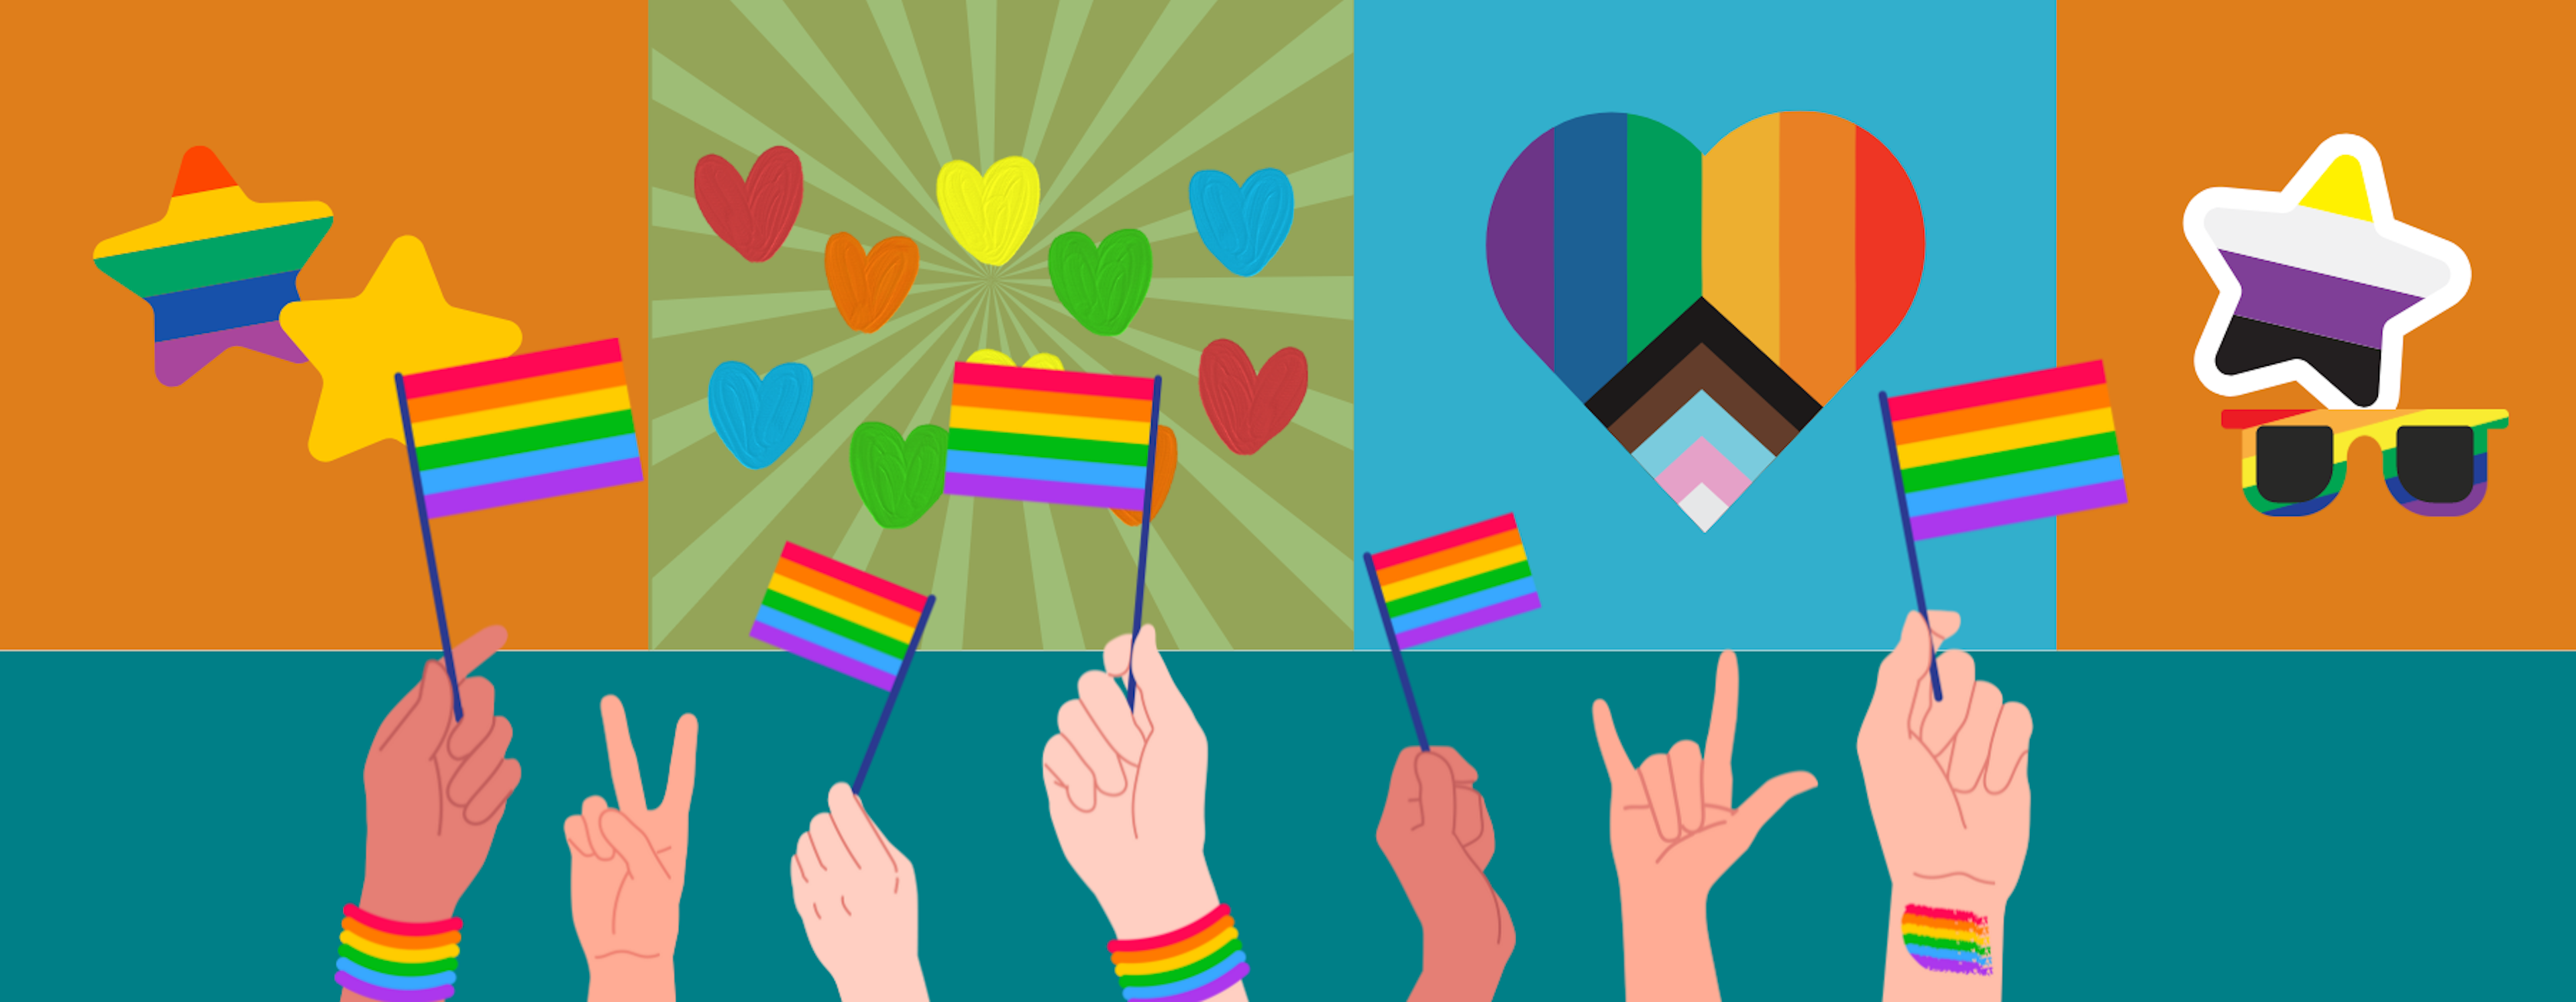 Illustrated image of hands holding pride flags